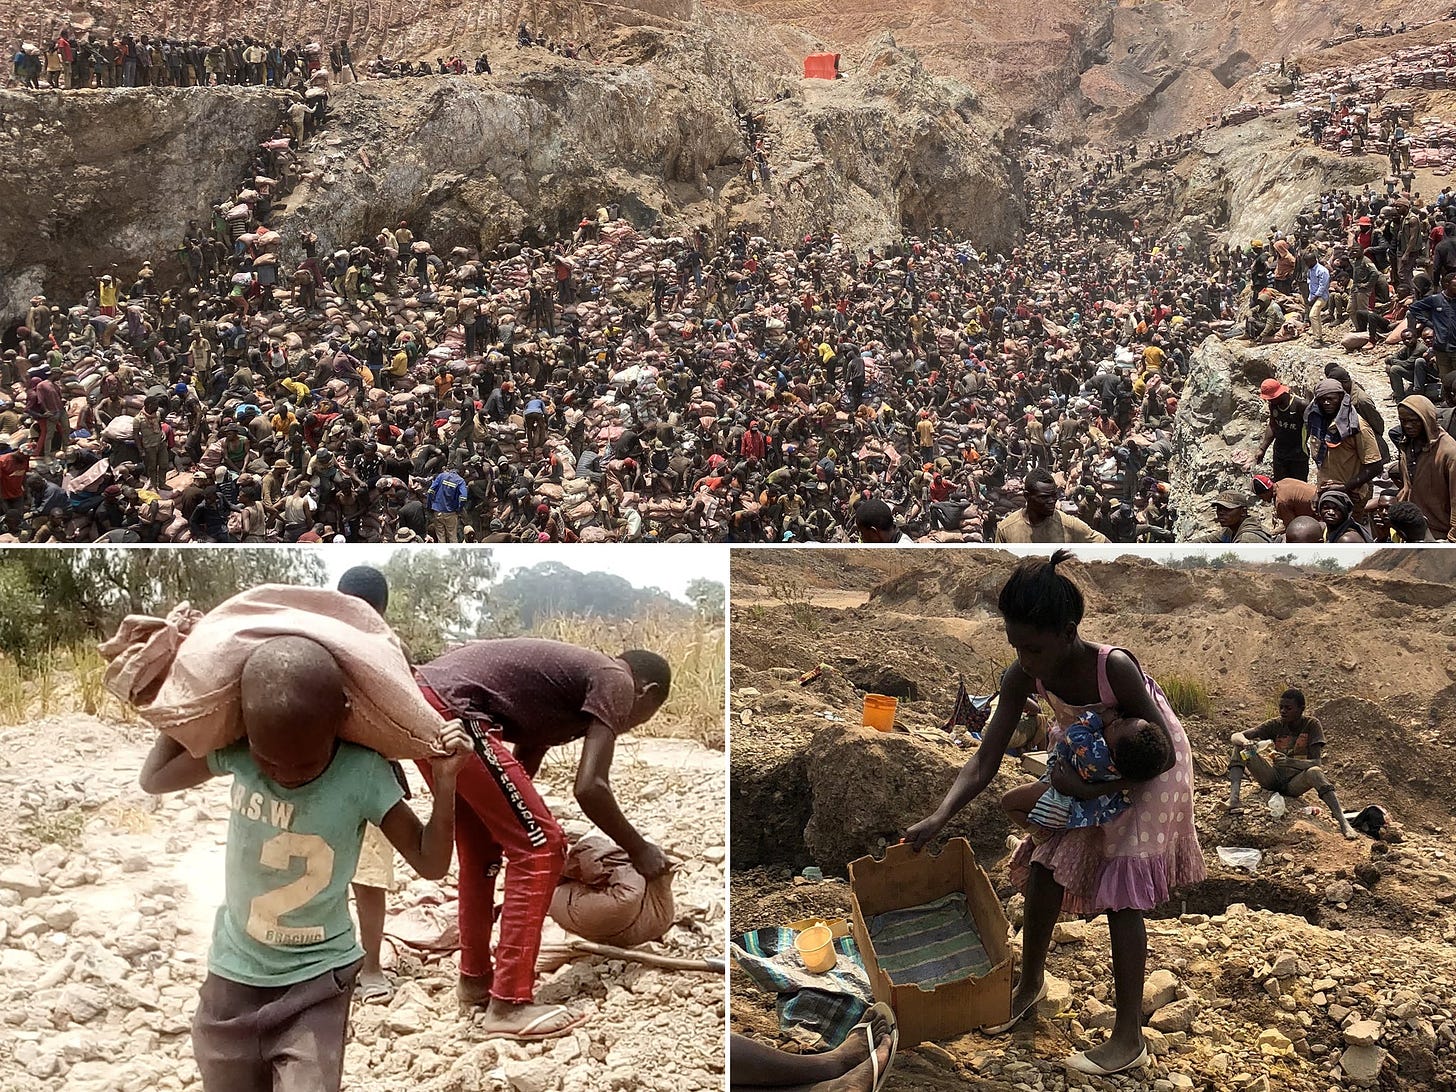 <p>The artisanal mining industry in the Democratic Republic of the Congo is rife with forced and child labor, unreported deaths and human rights abuses, writes academic and modern slavery researcher Siddharth Kara in his new book Cobalt Red  </p>